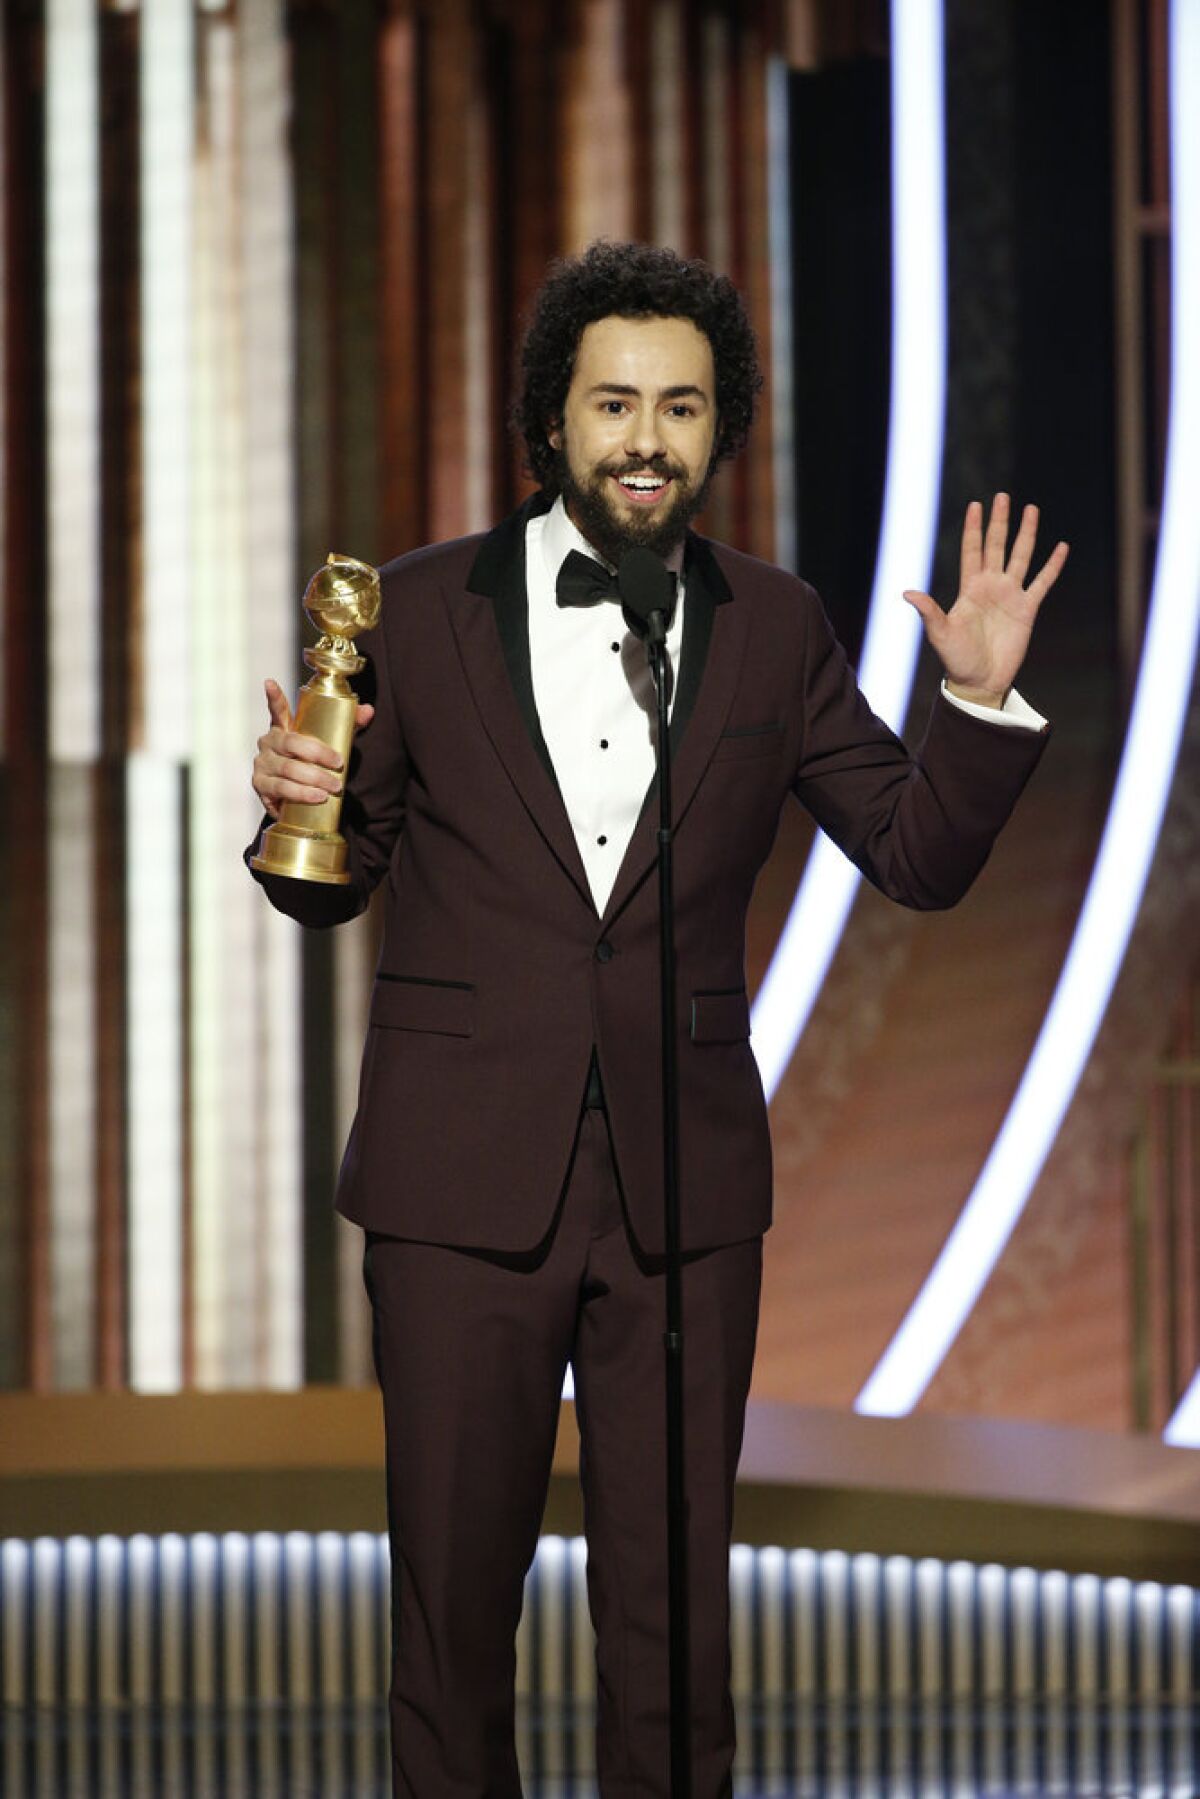 Ramy Youssef, winner of the Golden Globe for best actor in a comedy or musical series for "Ramy."